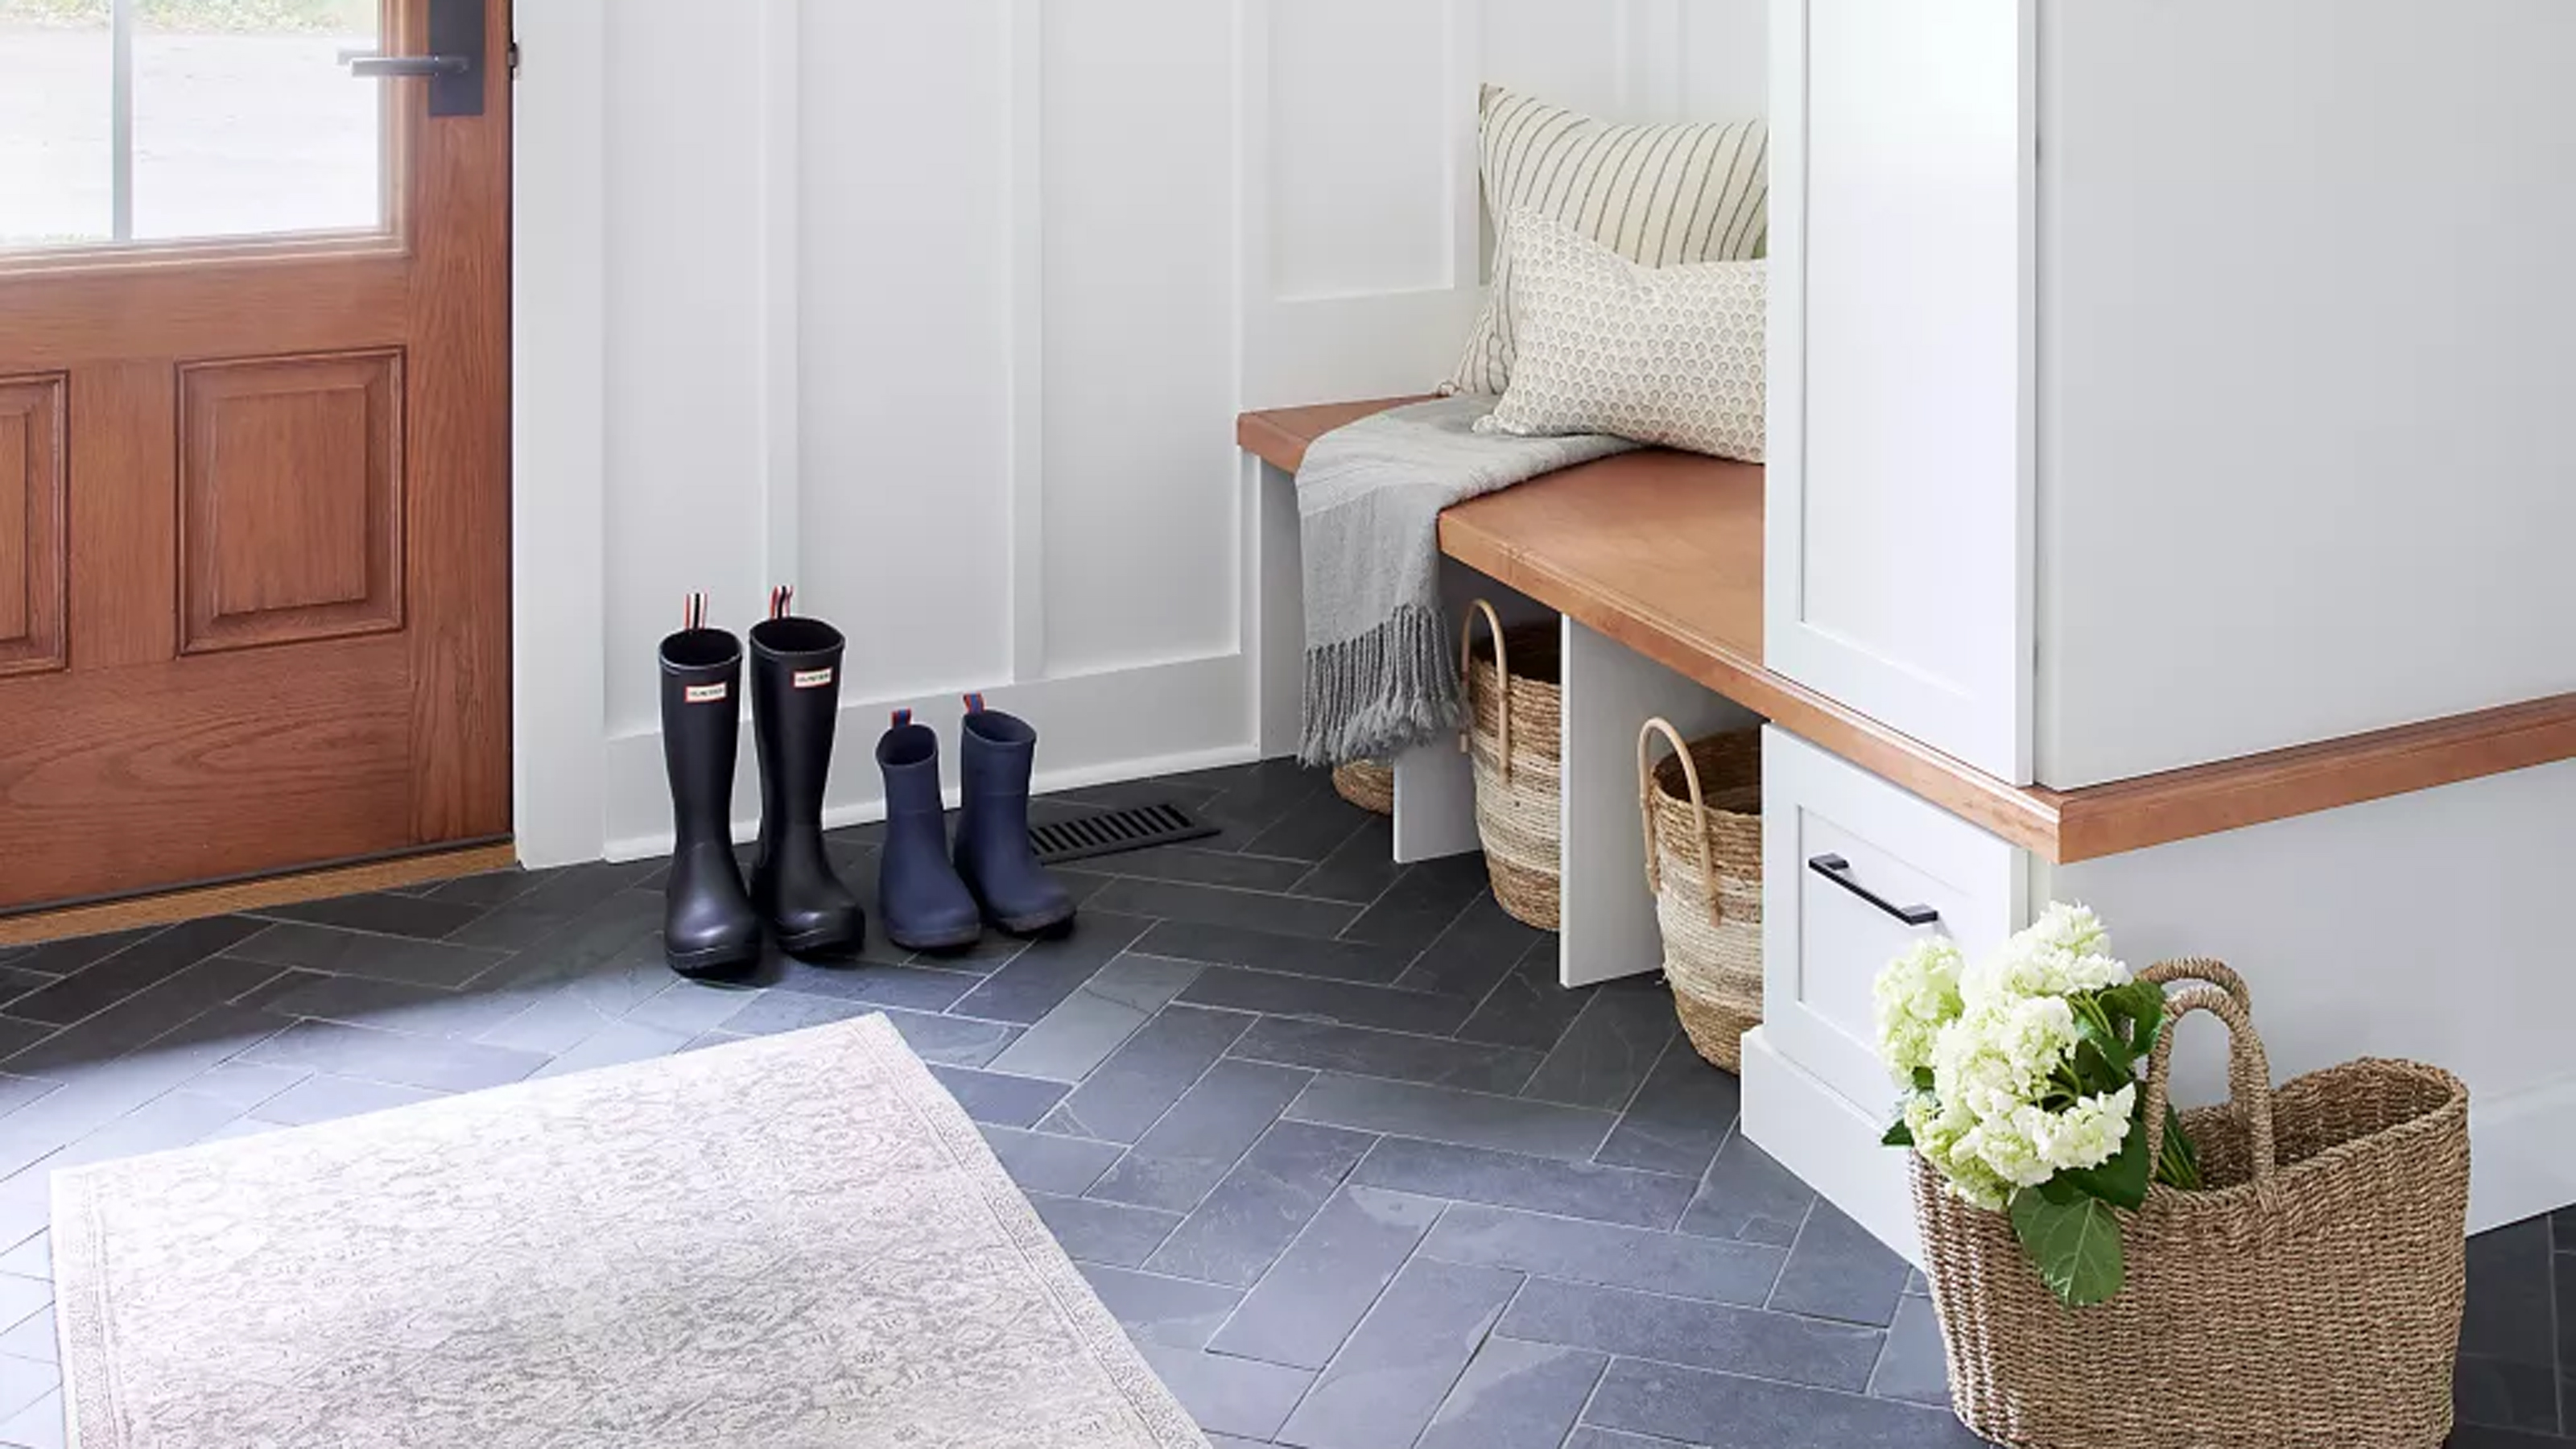 19 Tidy Boot Storage Ideas for Sloppy Wet Winter Boots